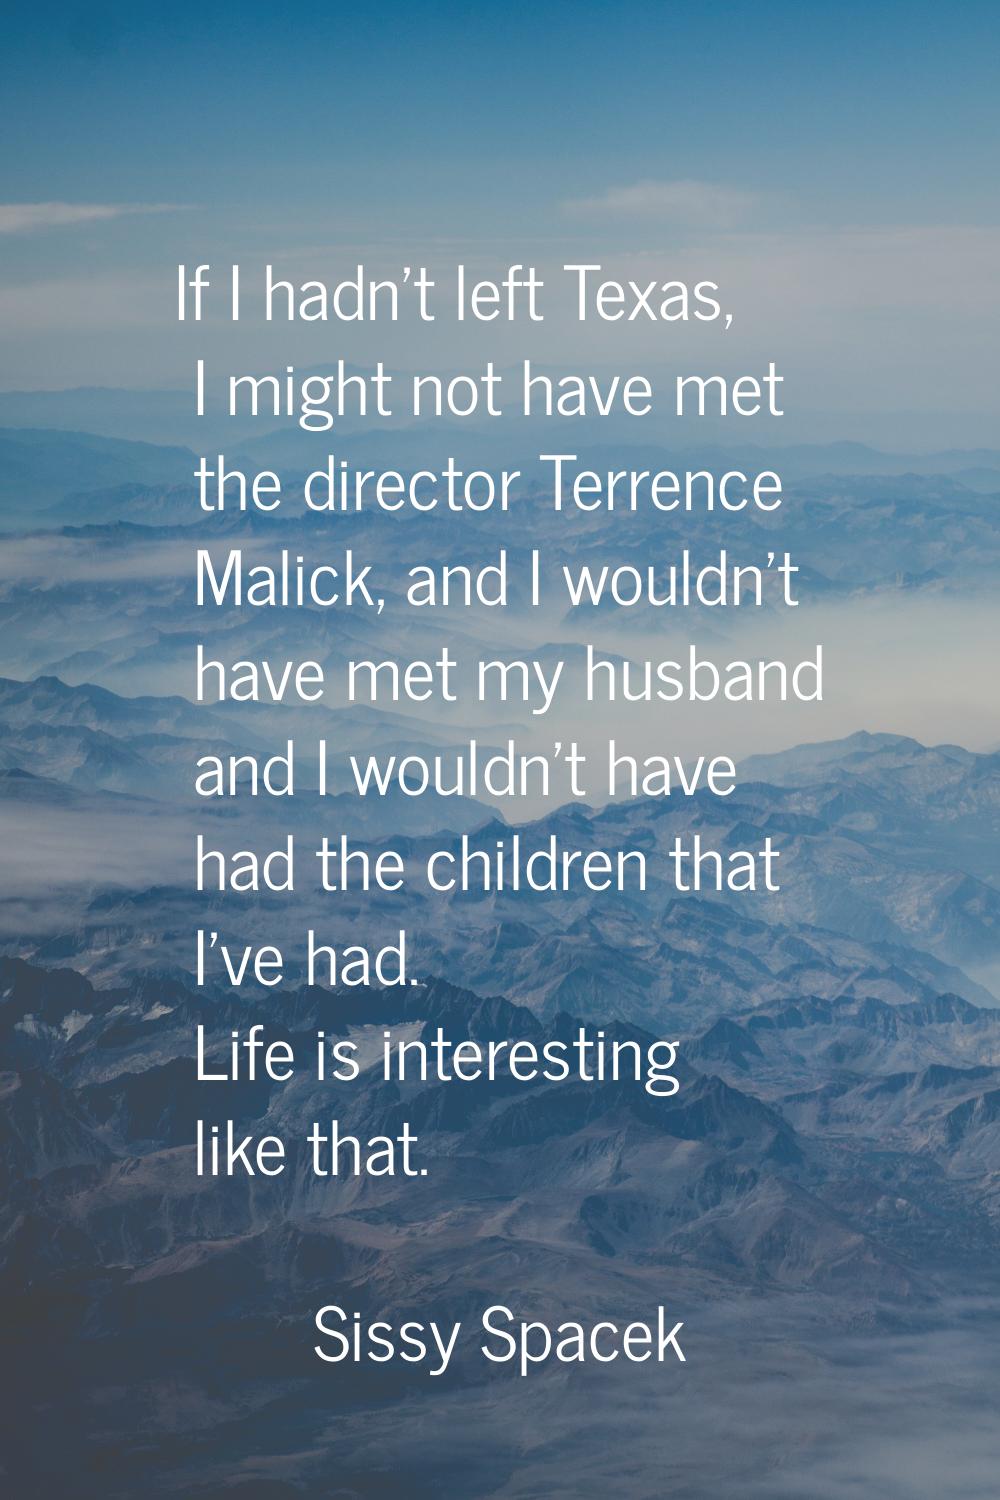 If I hadn't left Texas, I might not have met the director Terrence Malick, and I wouldn't have met 